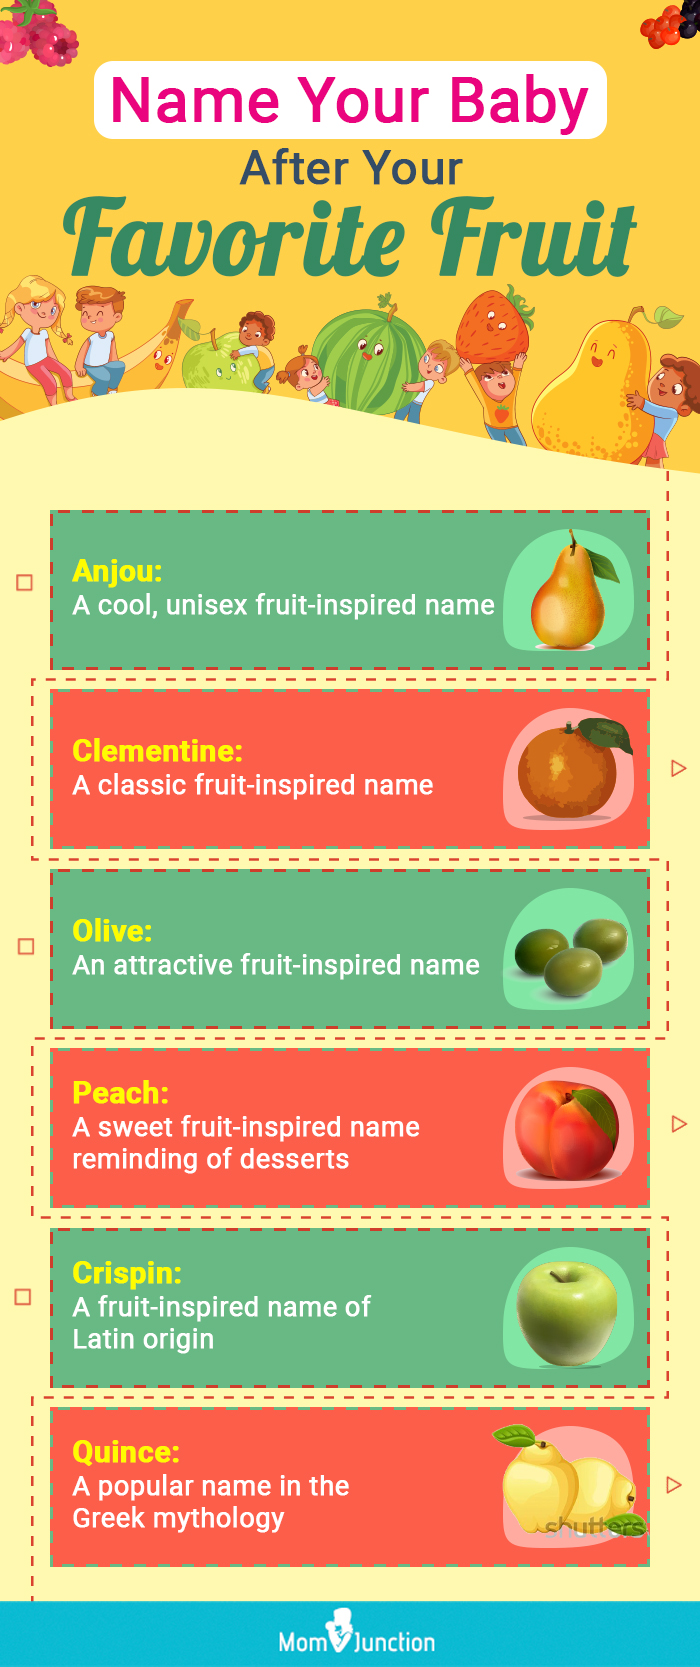 name your baby after your favorite fruit (infographic)